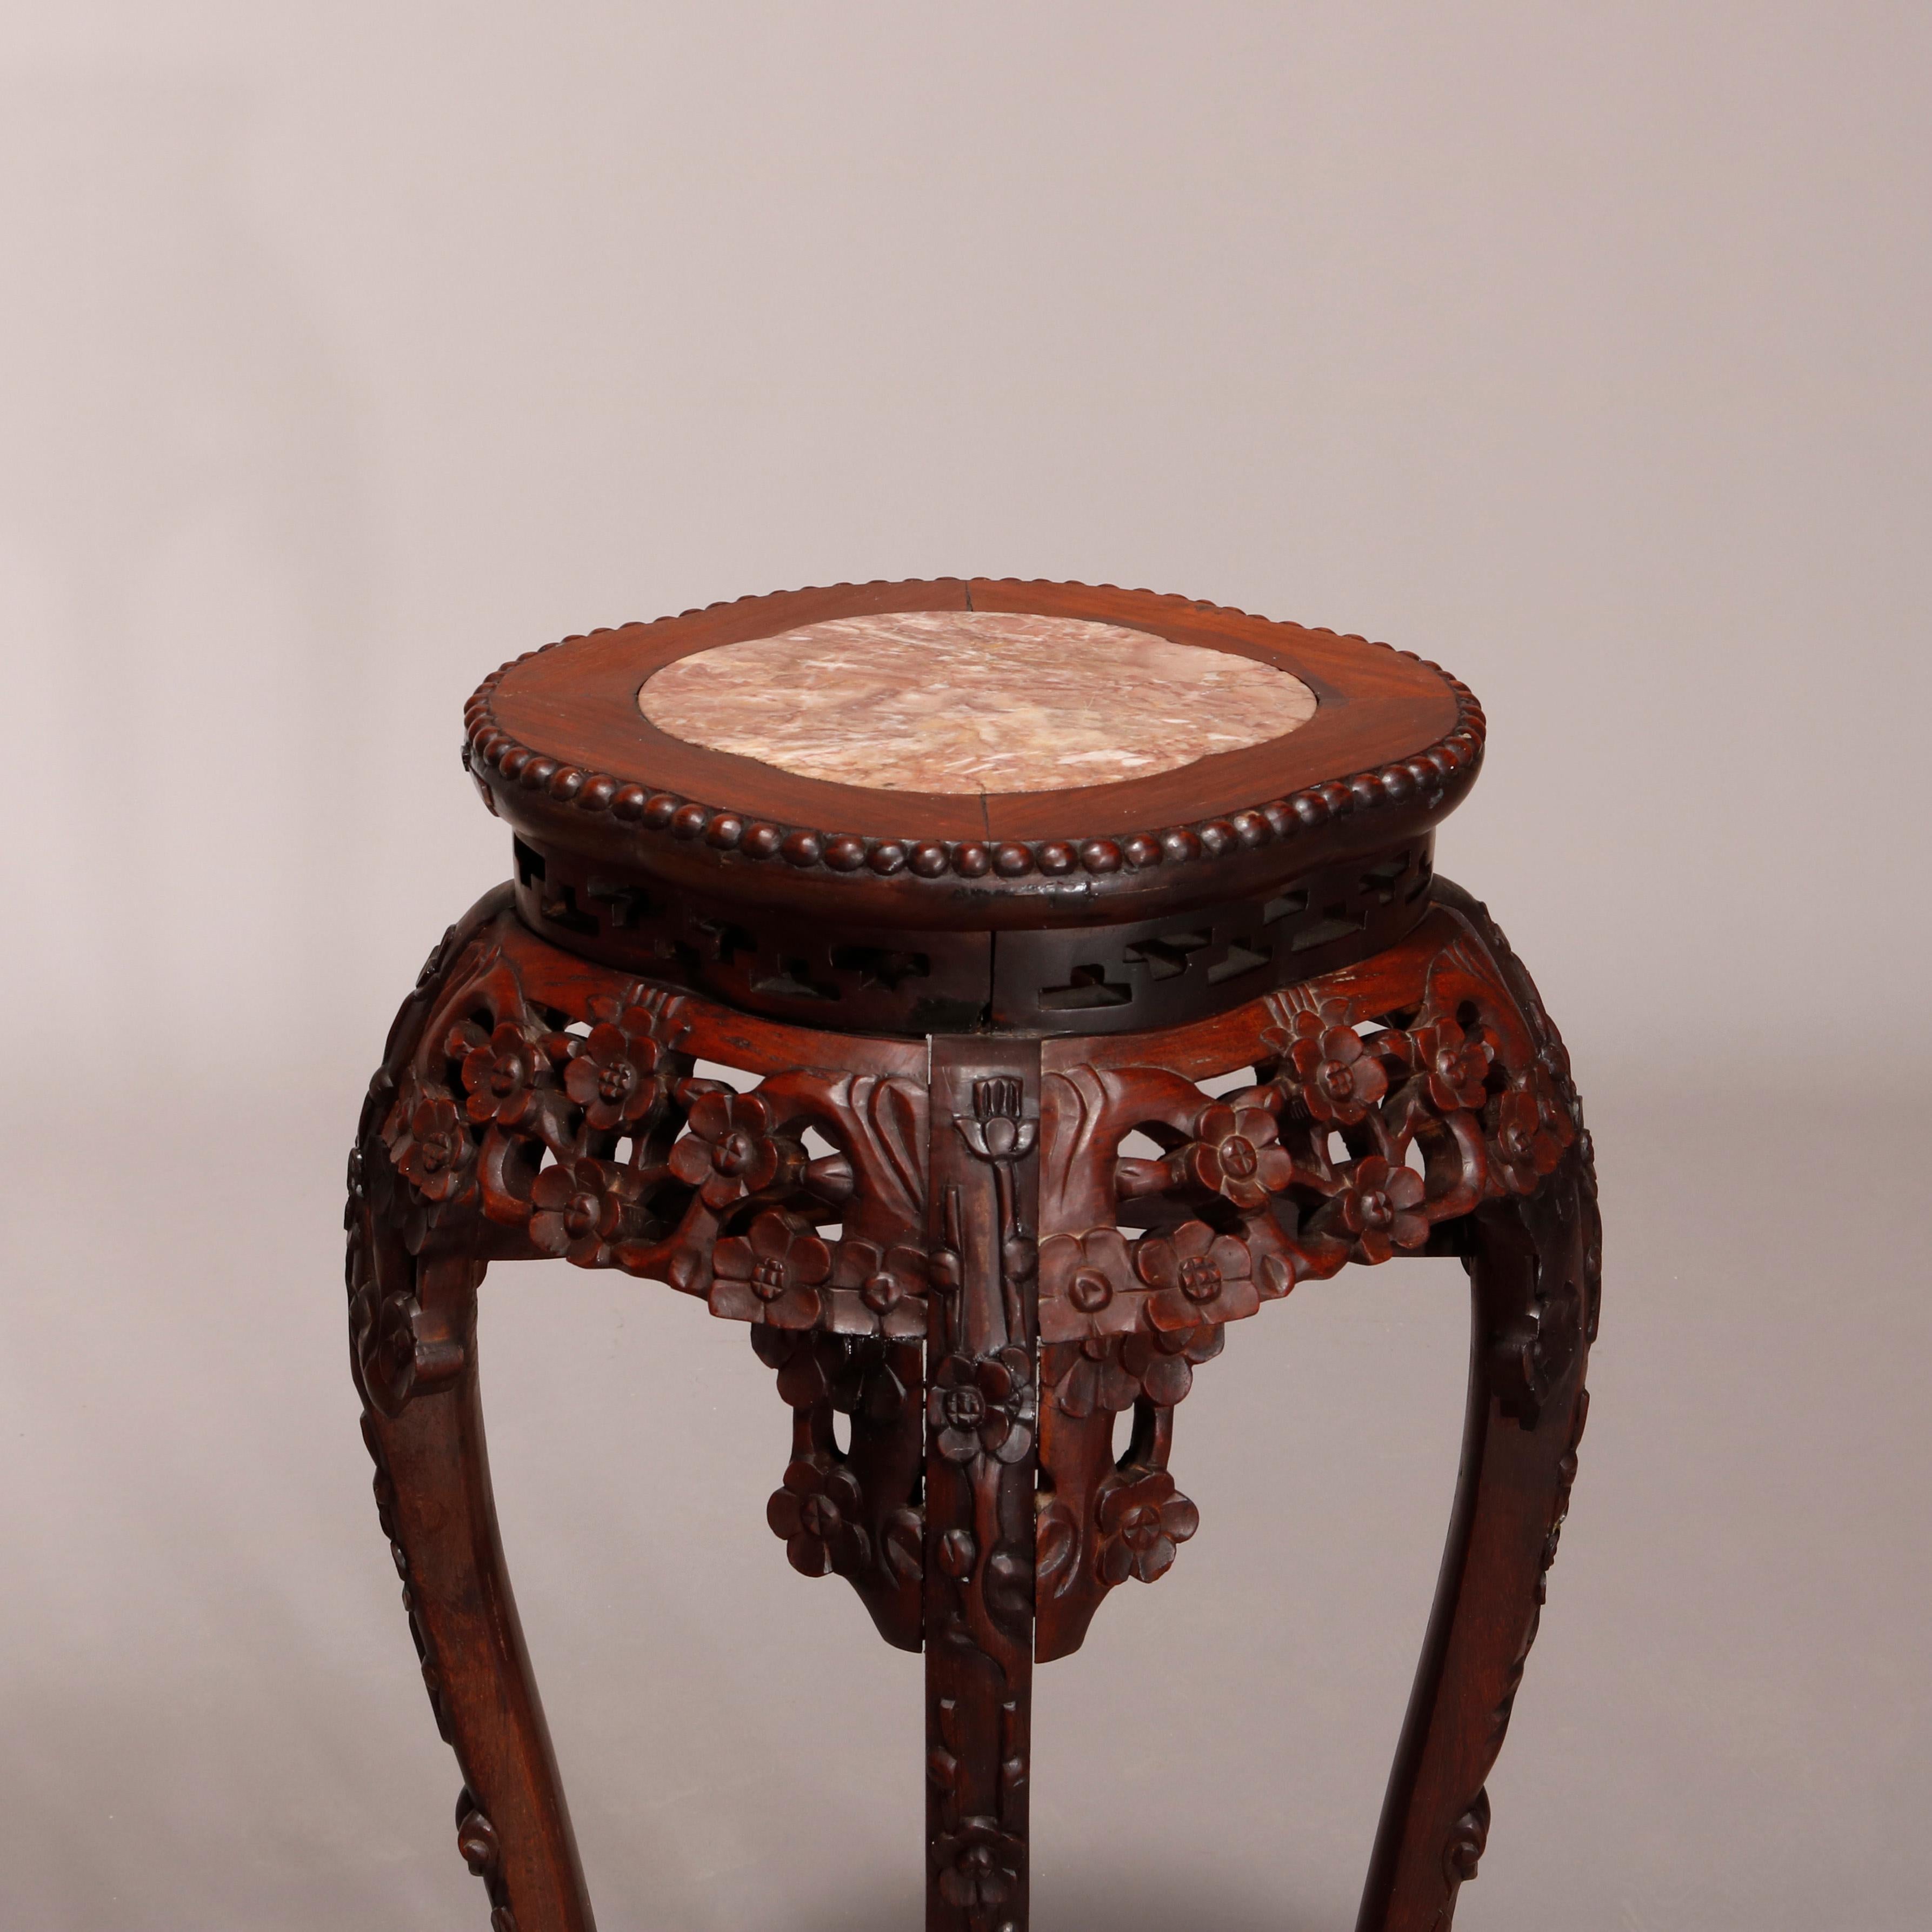 An antique Chinese fern stand offers inset marble display surmounting foliate and floral carved hardwood base having cabriole legs and raised cross stretcher, c1900.

Measures: 30.75